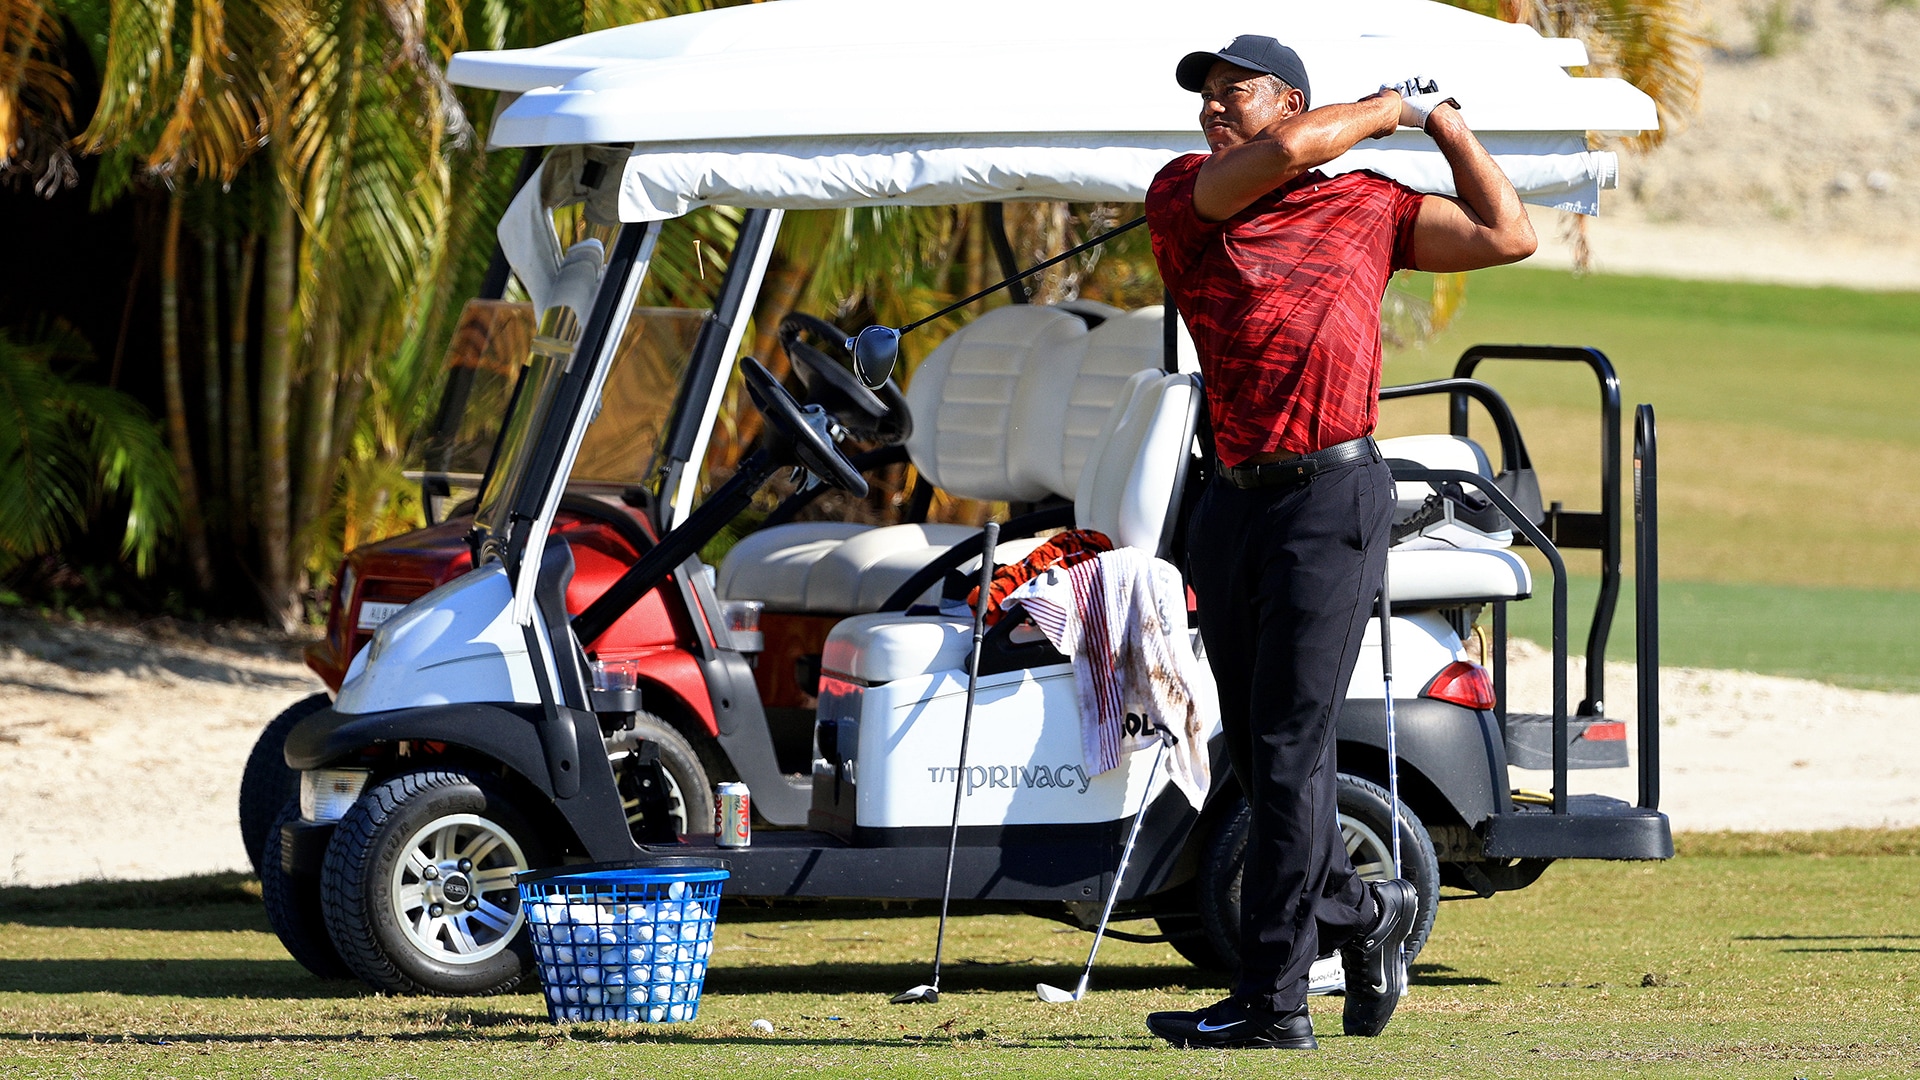 Wearing Sunday red, Tiger Woods hits balls yet again during Hero